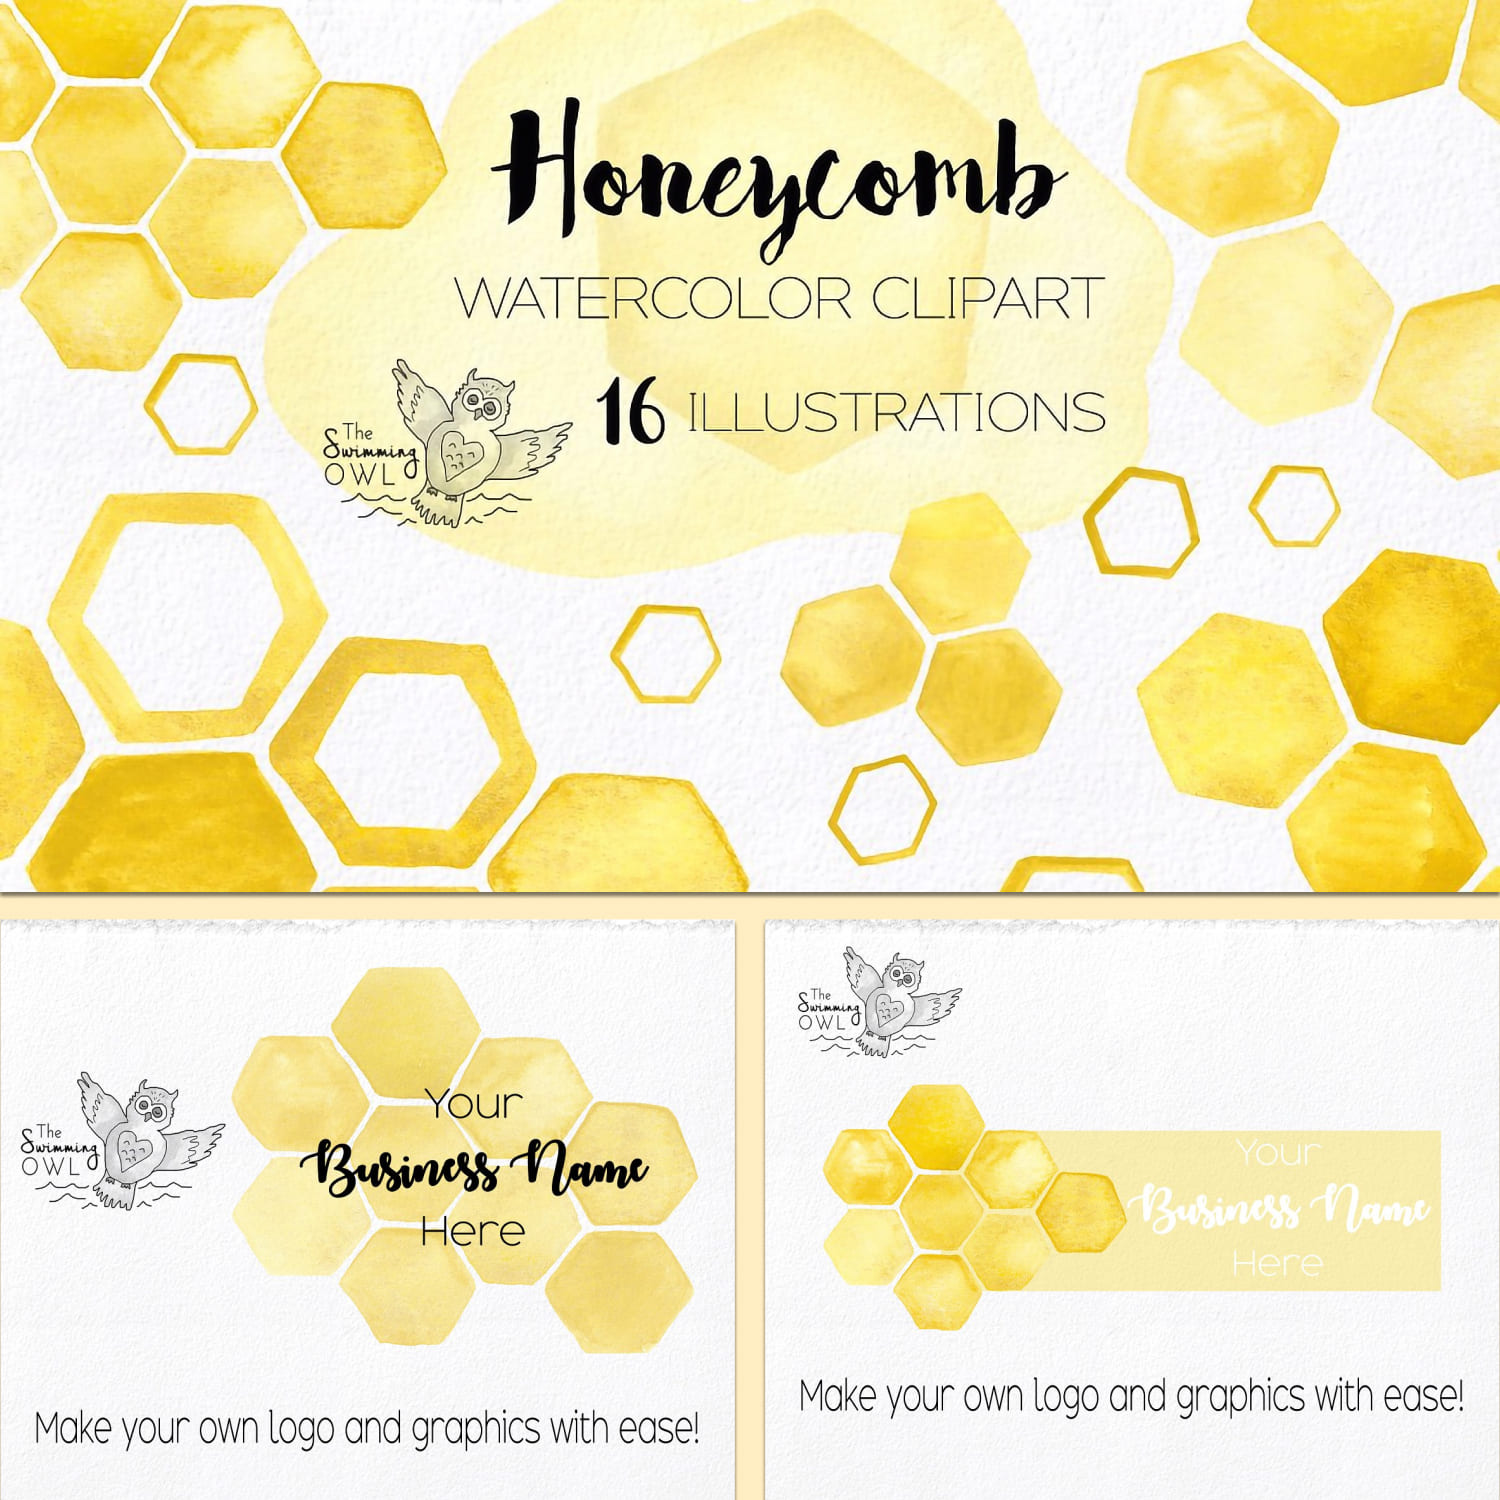 Honeycomb watercolor clipart - main image preview.